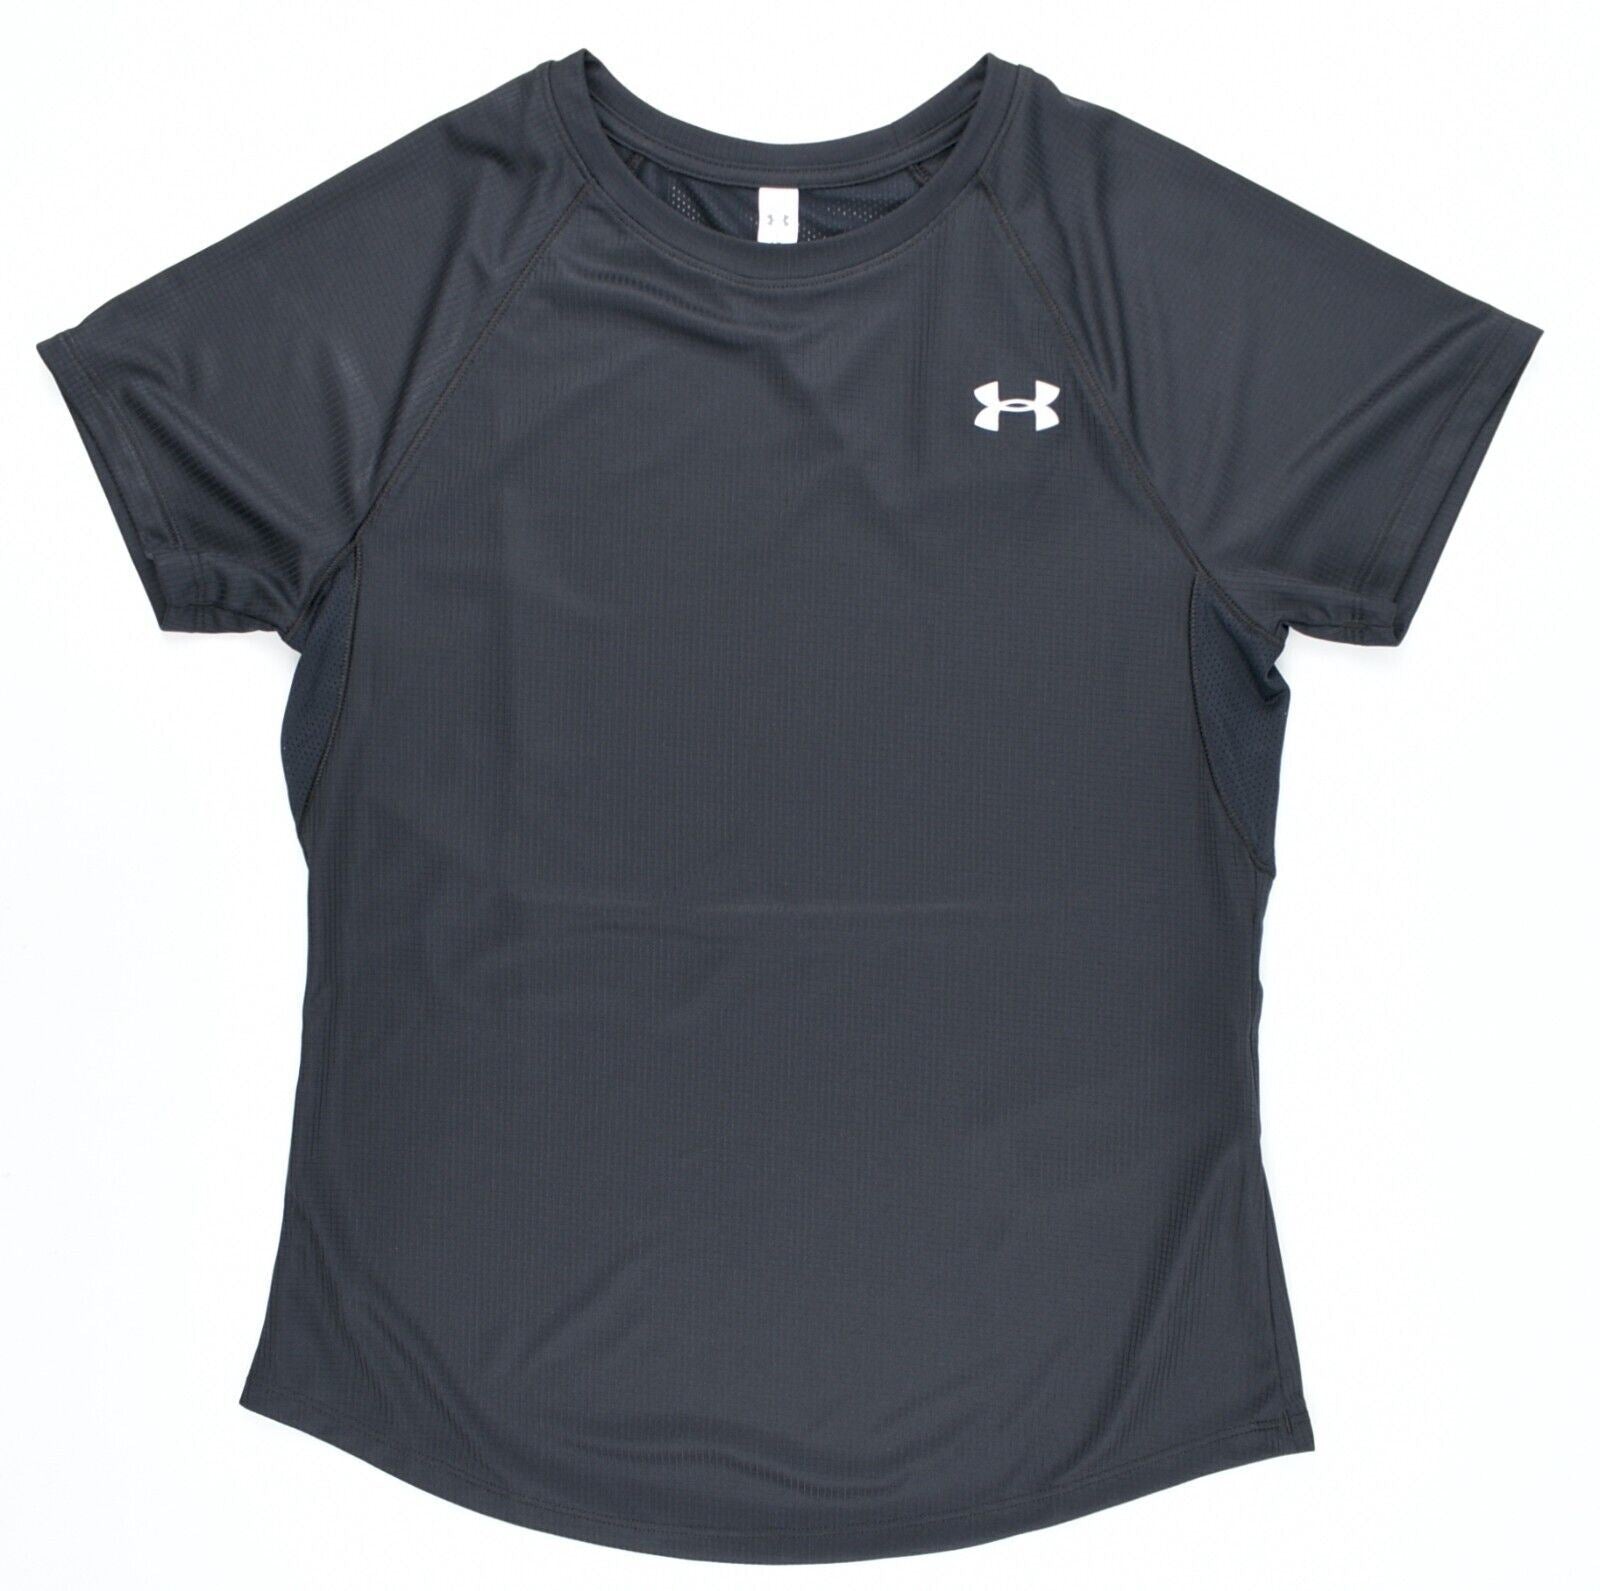 UNDER ARMOUR Womens Speed Stride Workout Gym T-shirt, Black, size S /UK 10